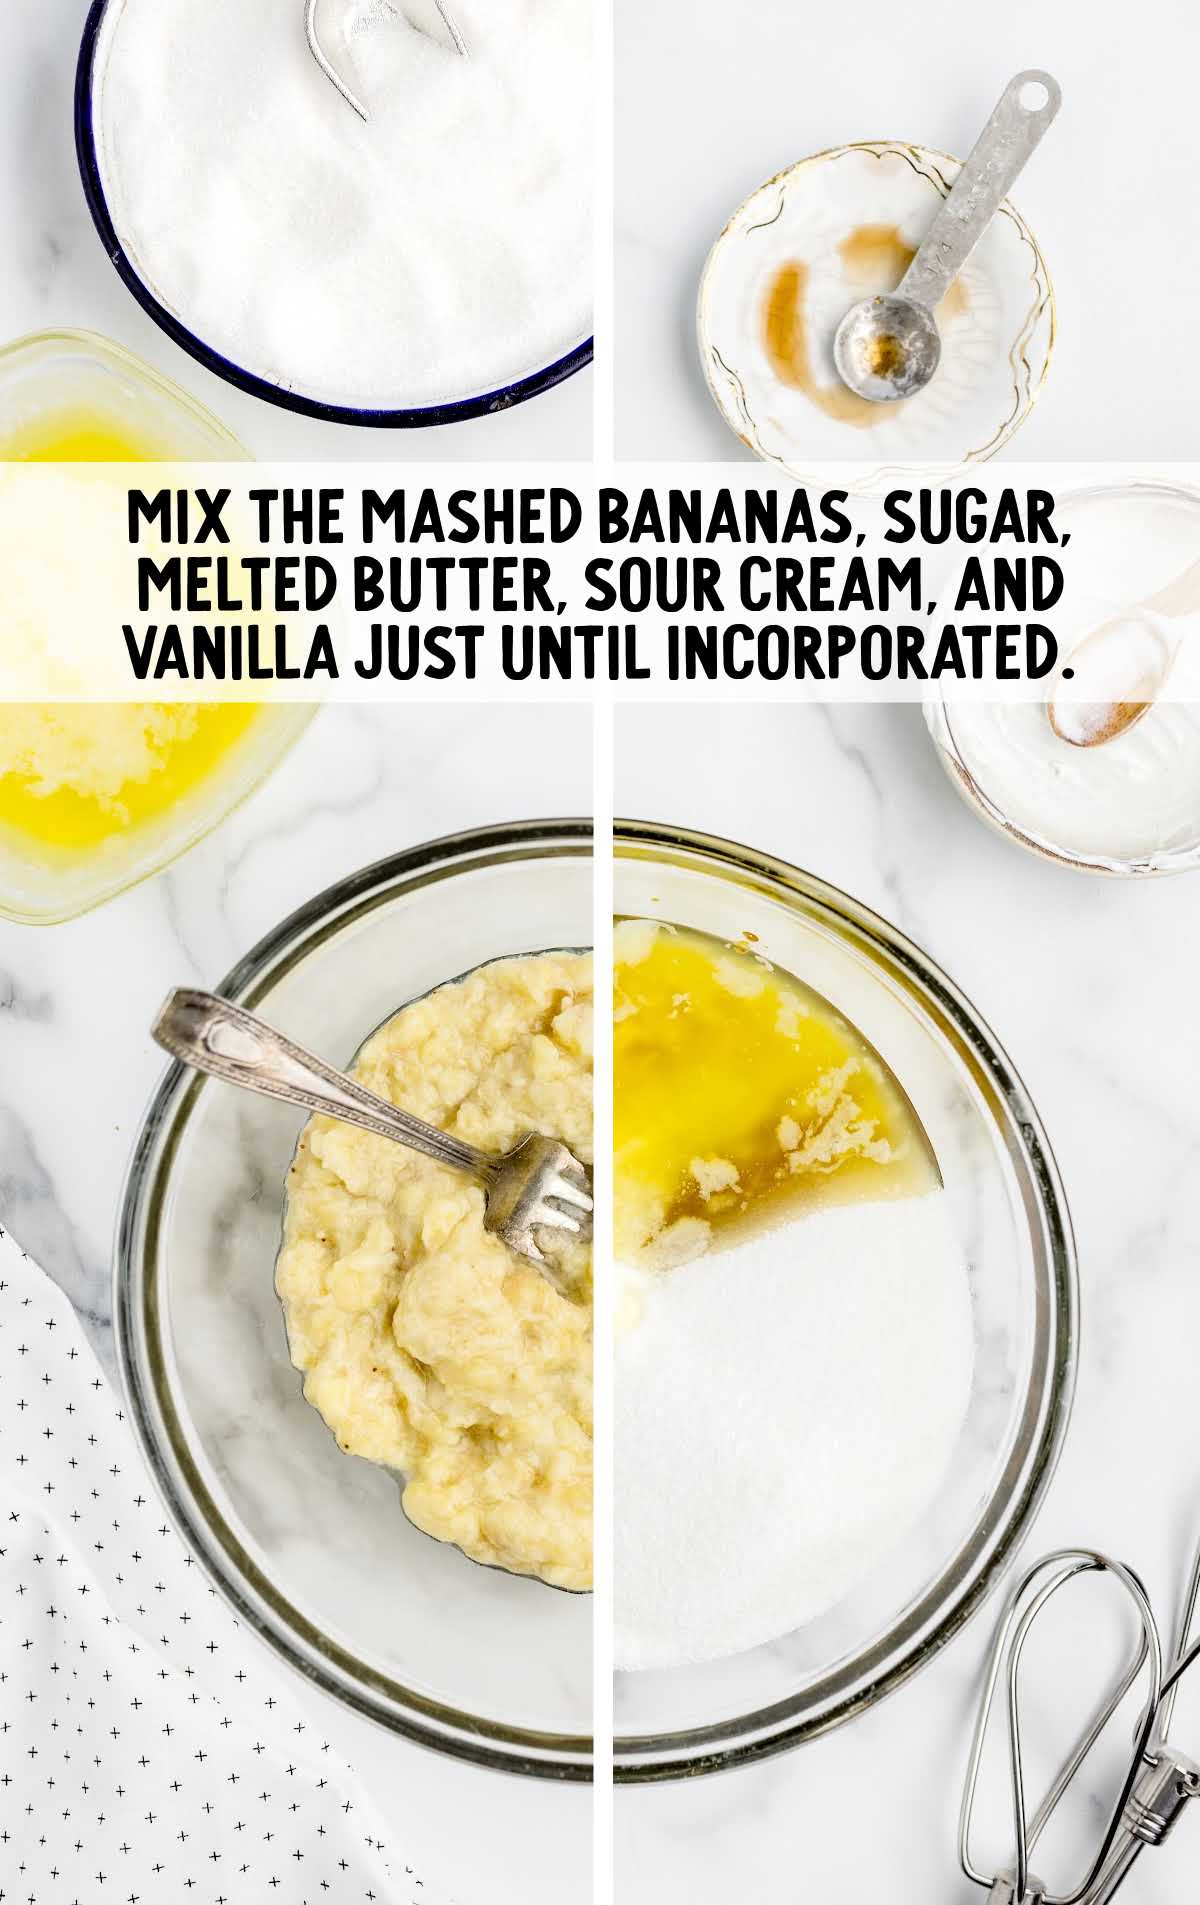 mashed bananas, granulated sugar, melted butter, sour cream, and vanilla combined in a bowl